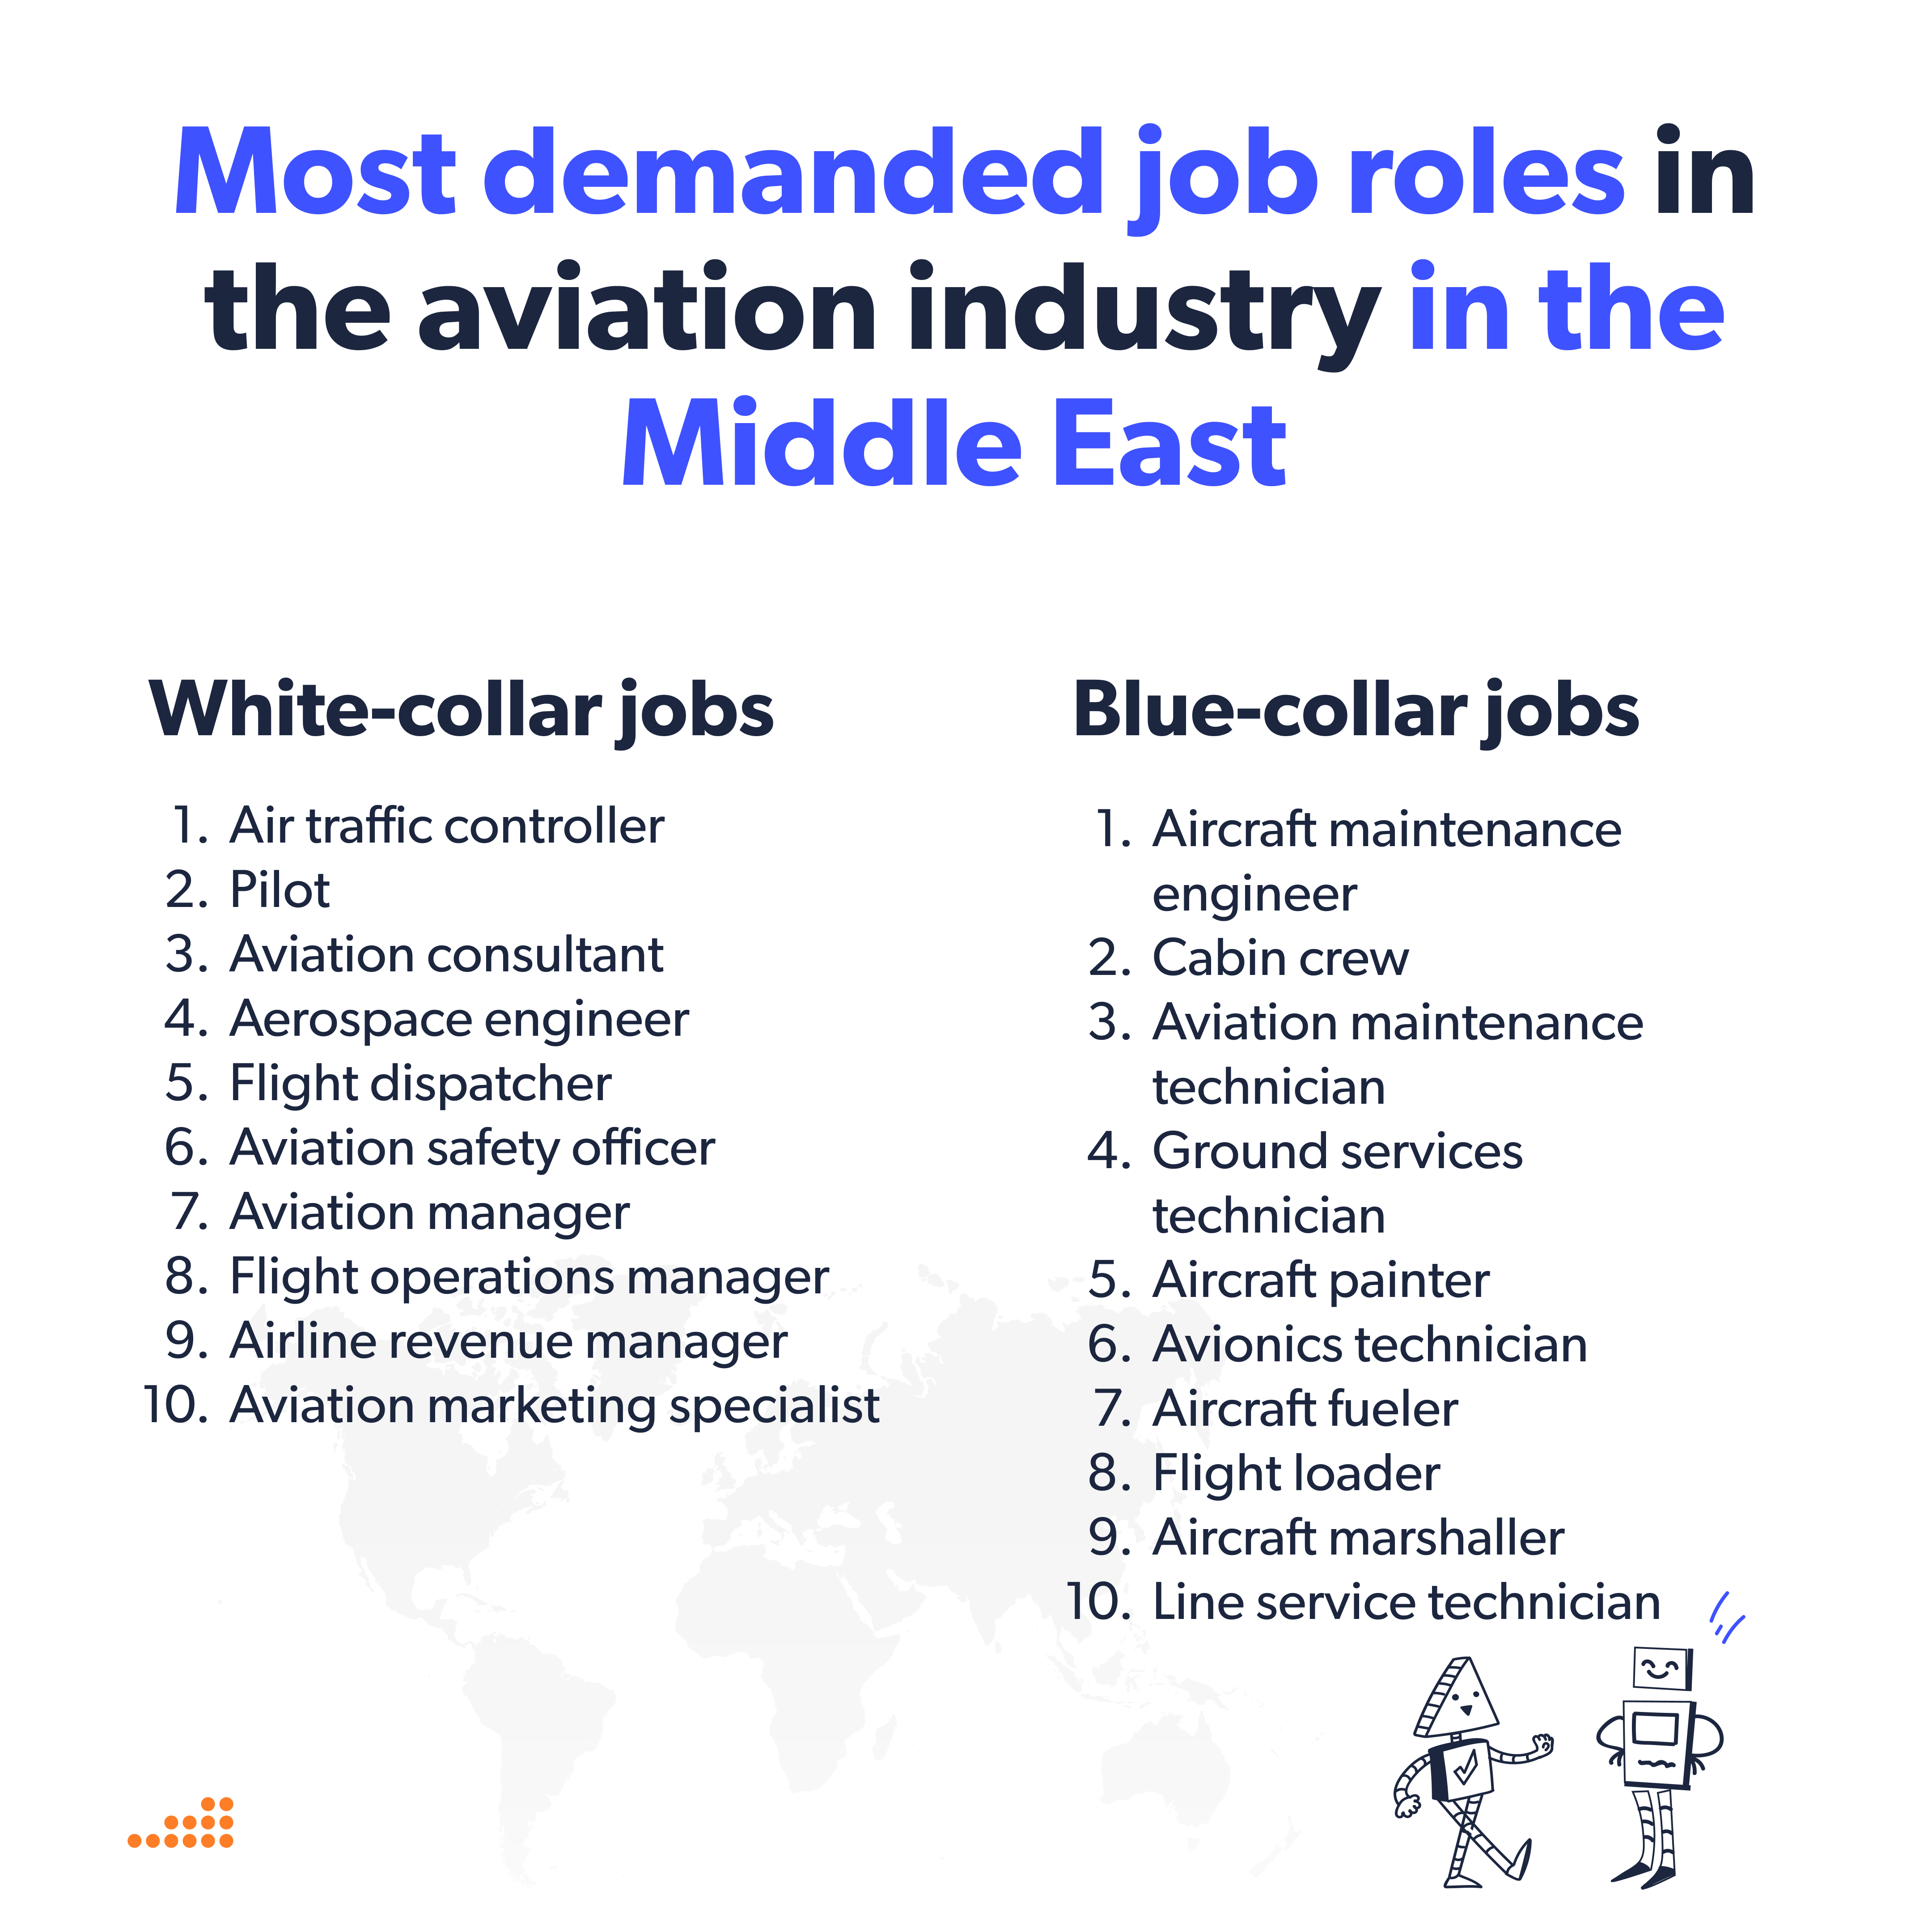 Most demanded job roles in the aviation industry in the Middle East